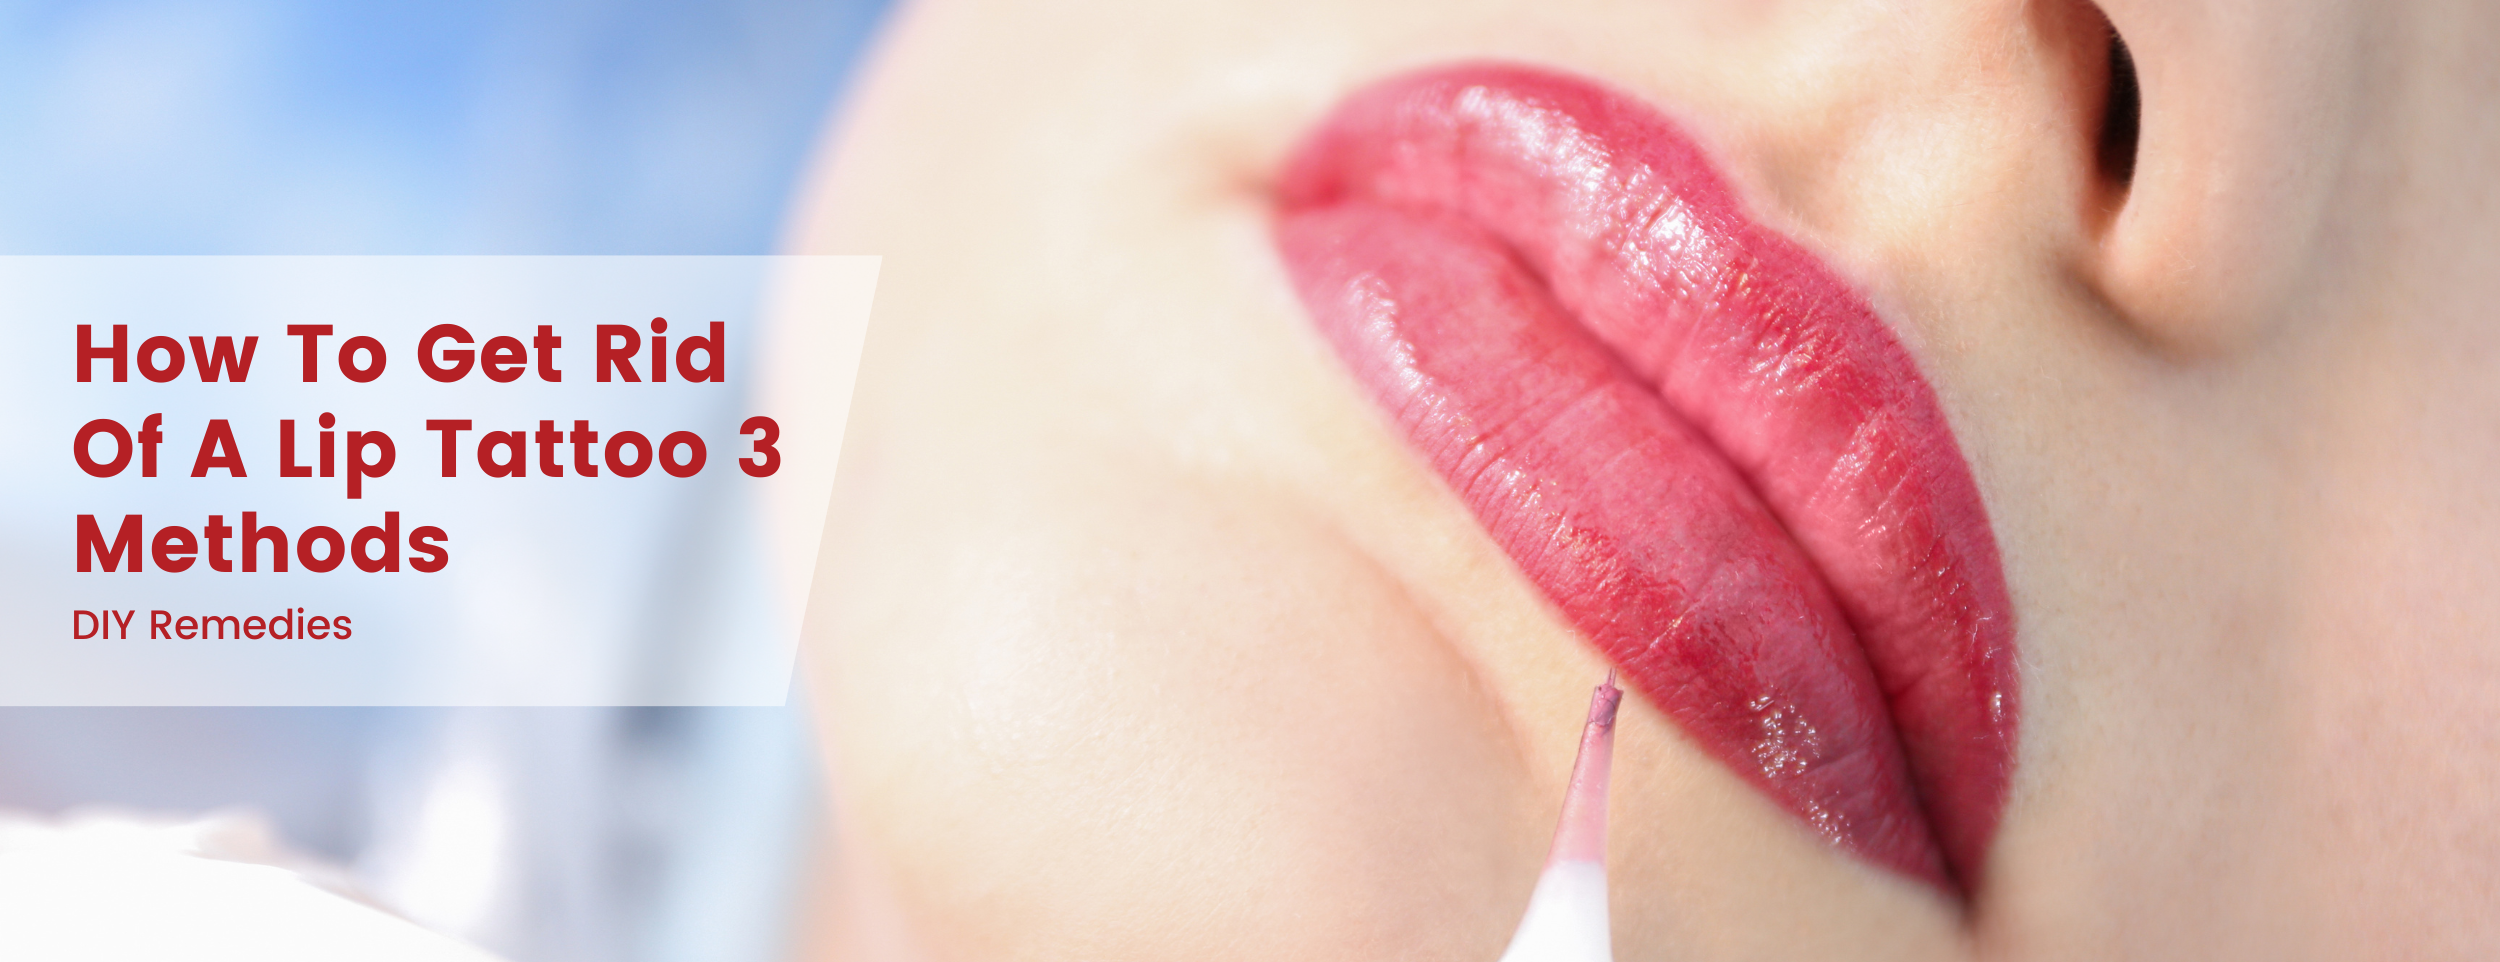 Lip Tattoo Removal: 3 Home Remedies & Methods